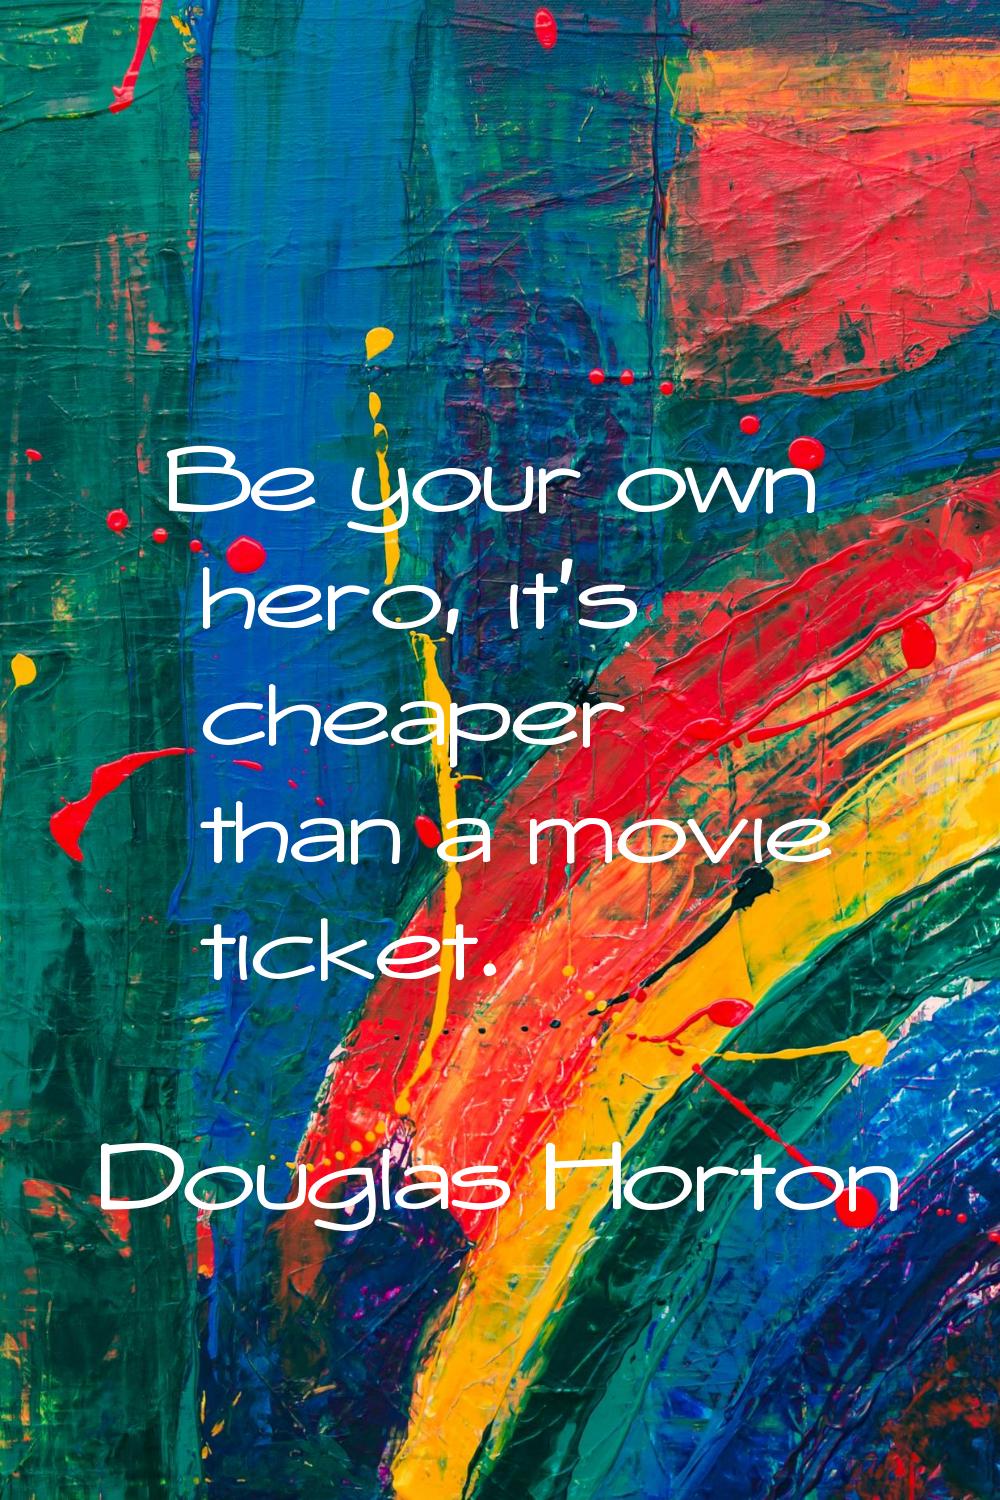 Be your own hero, it's cheaper than a movie ticket.